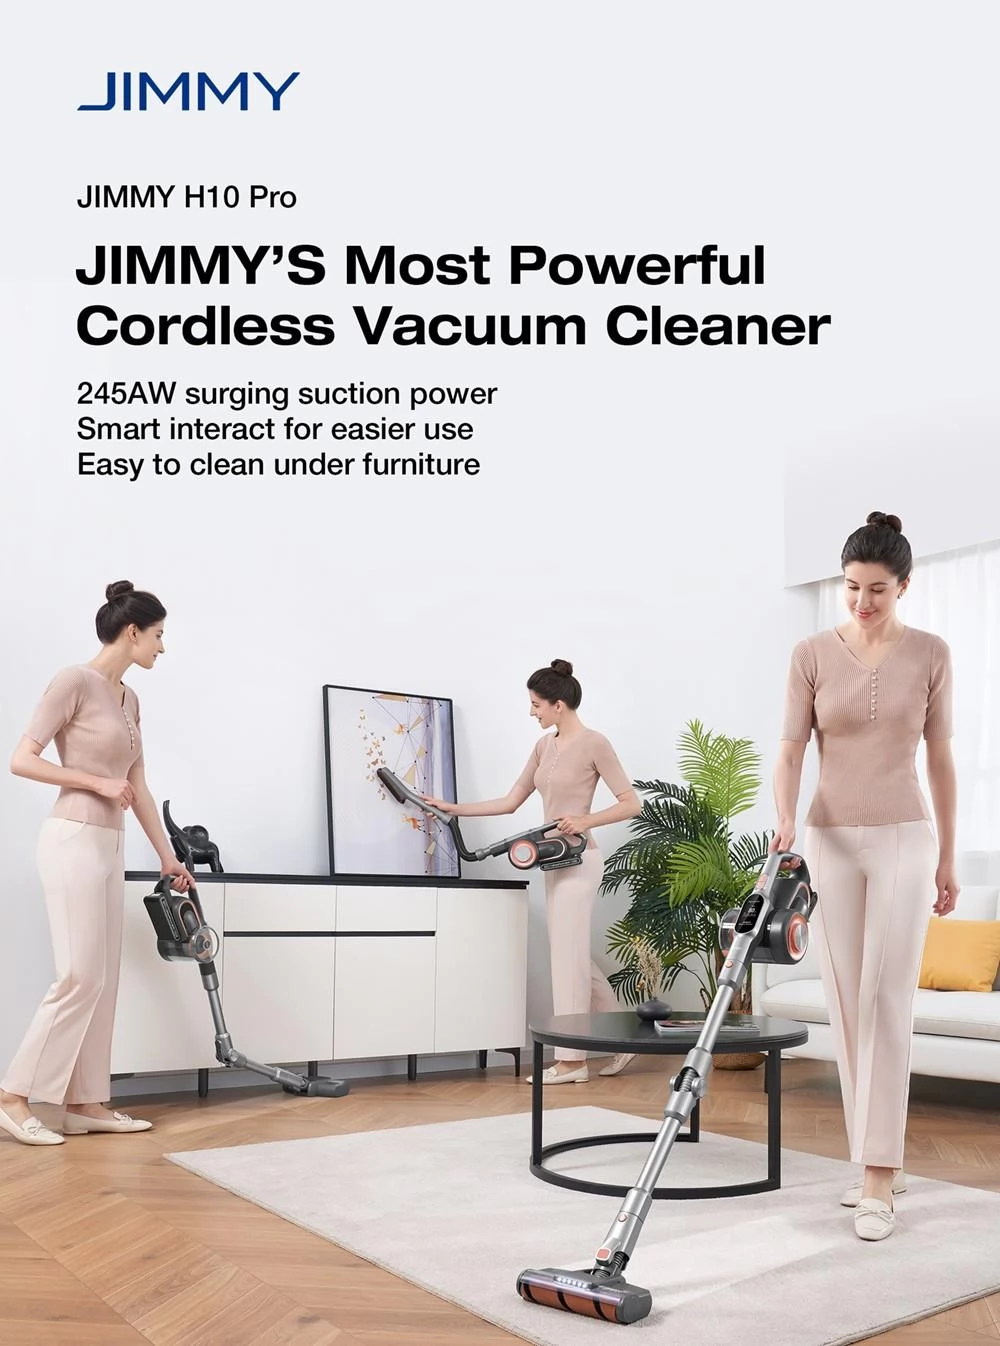 JIMMY H10 Pro Cordless Handheld Vacuum Cleaner, 245AW Suction, 86.4WH Battery, 600ml Dust Cup, 90min Run Time, LCD Screen